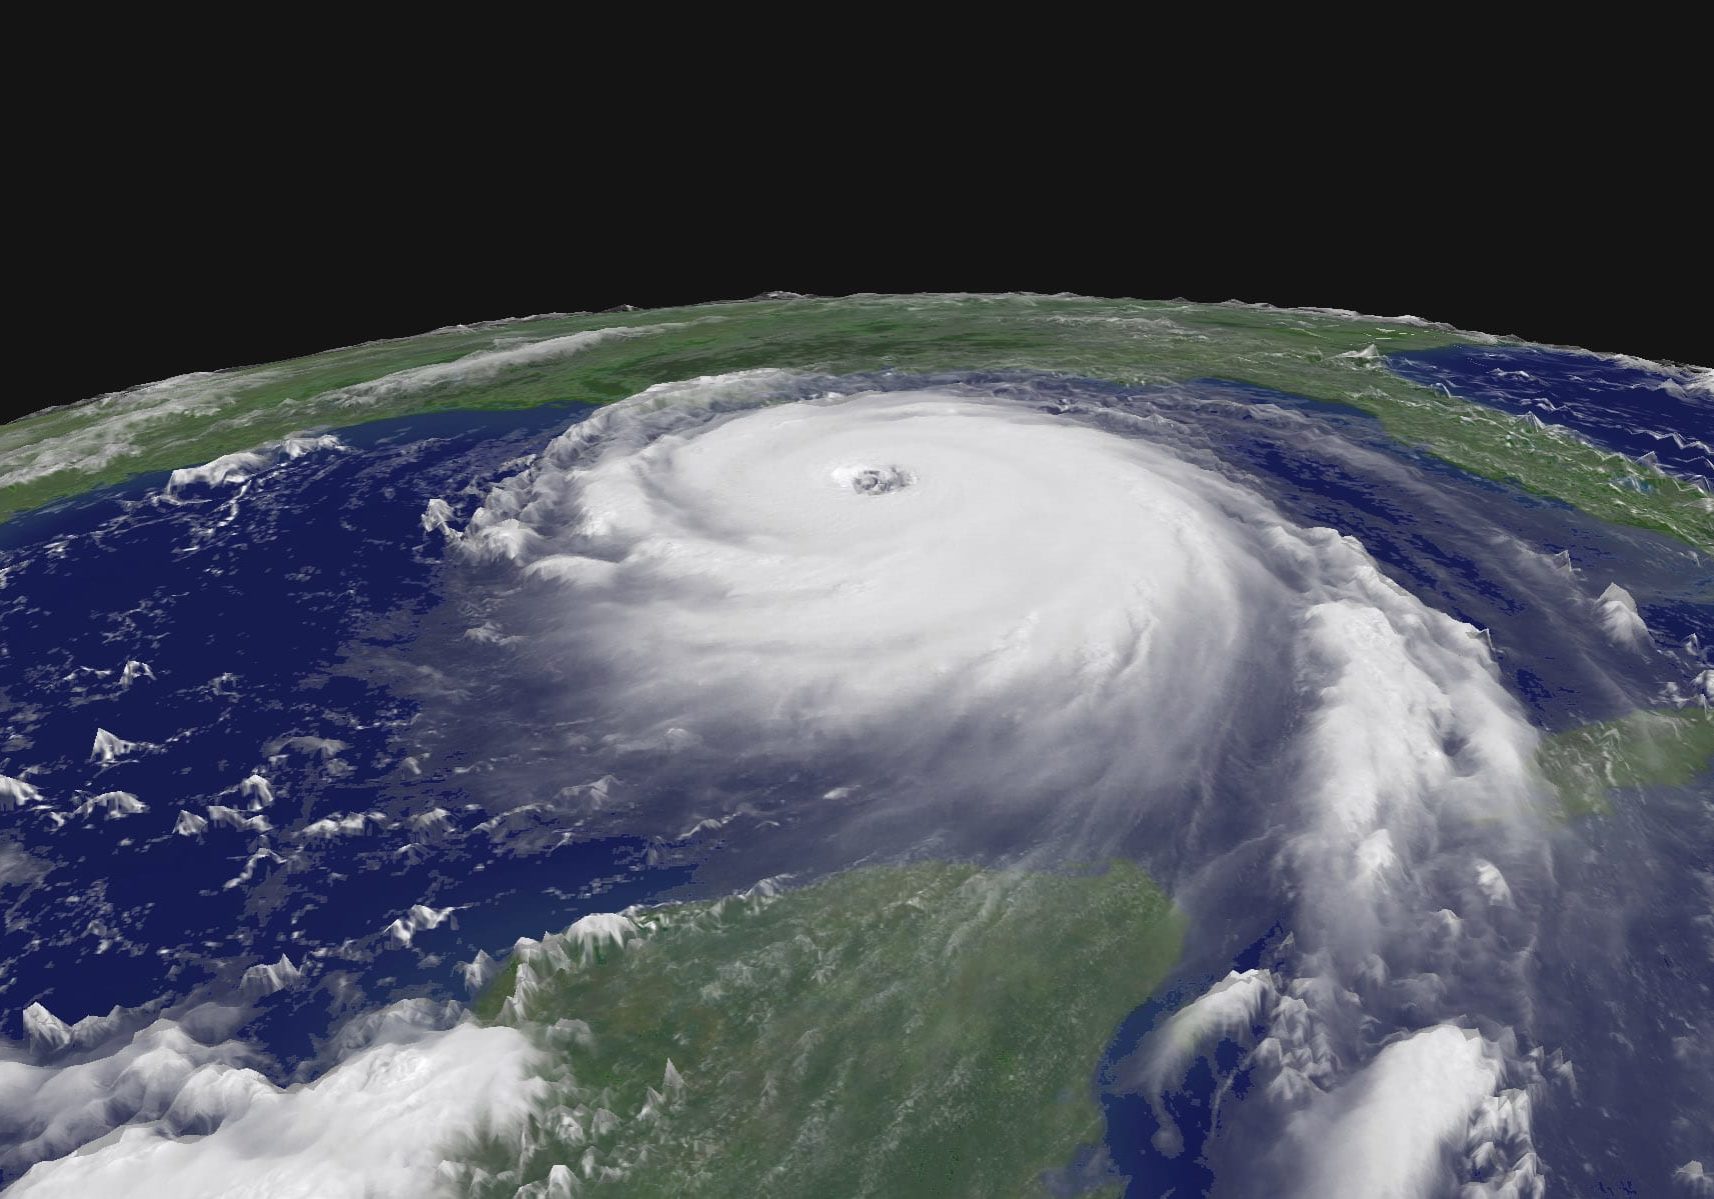 Clouds over the ocean can eventually form storms. If these continue to build, they can become tropical storms or hurricanes. Photo of Hurricane Katrina courtesy of NASA.